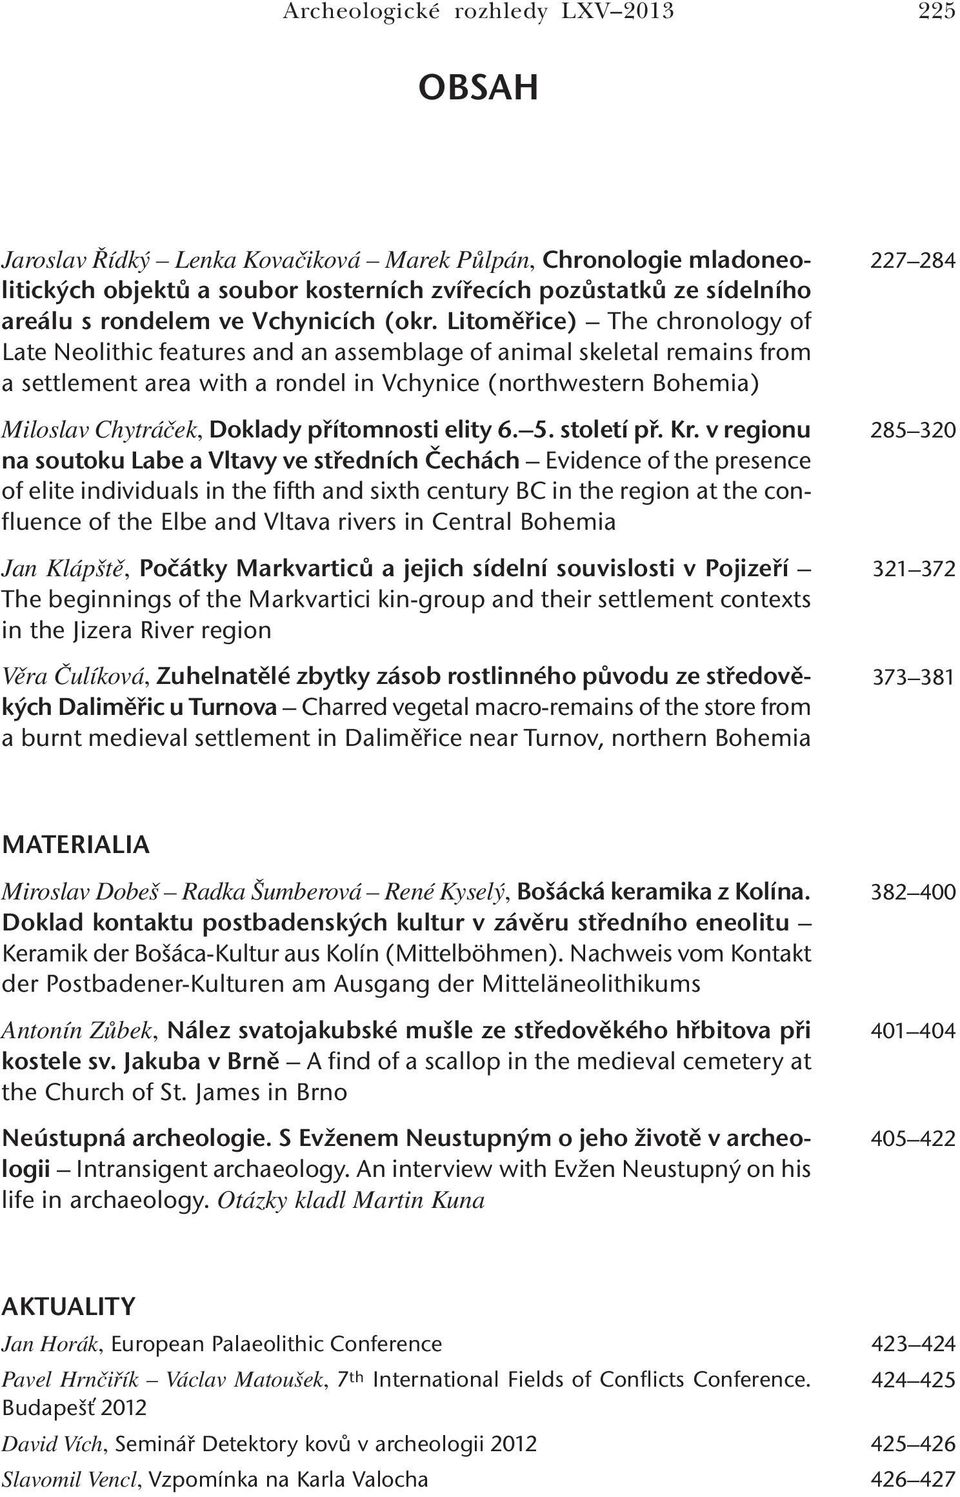 Litoměřice) The chronology of Late Neolithic features and an assemblage of animal skeletal remains from a settlement area with a rondel in Vchynice (northwestern Bohemia) Miloslav Chytráček, Doklady